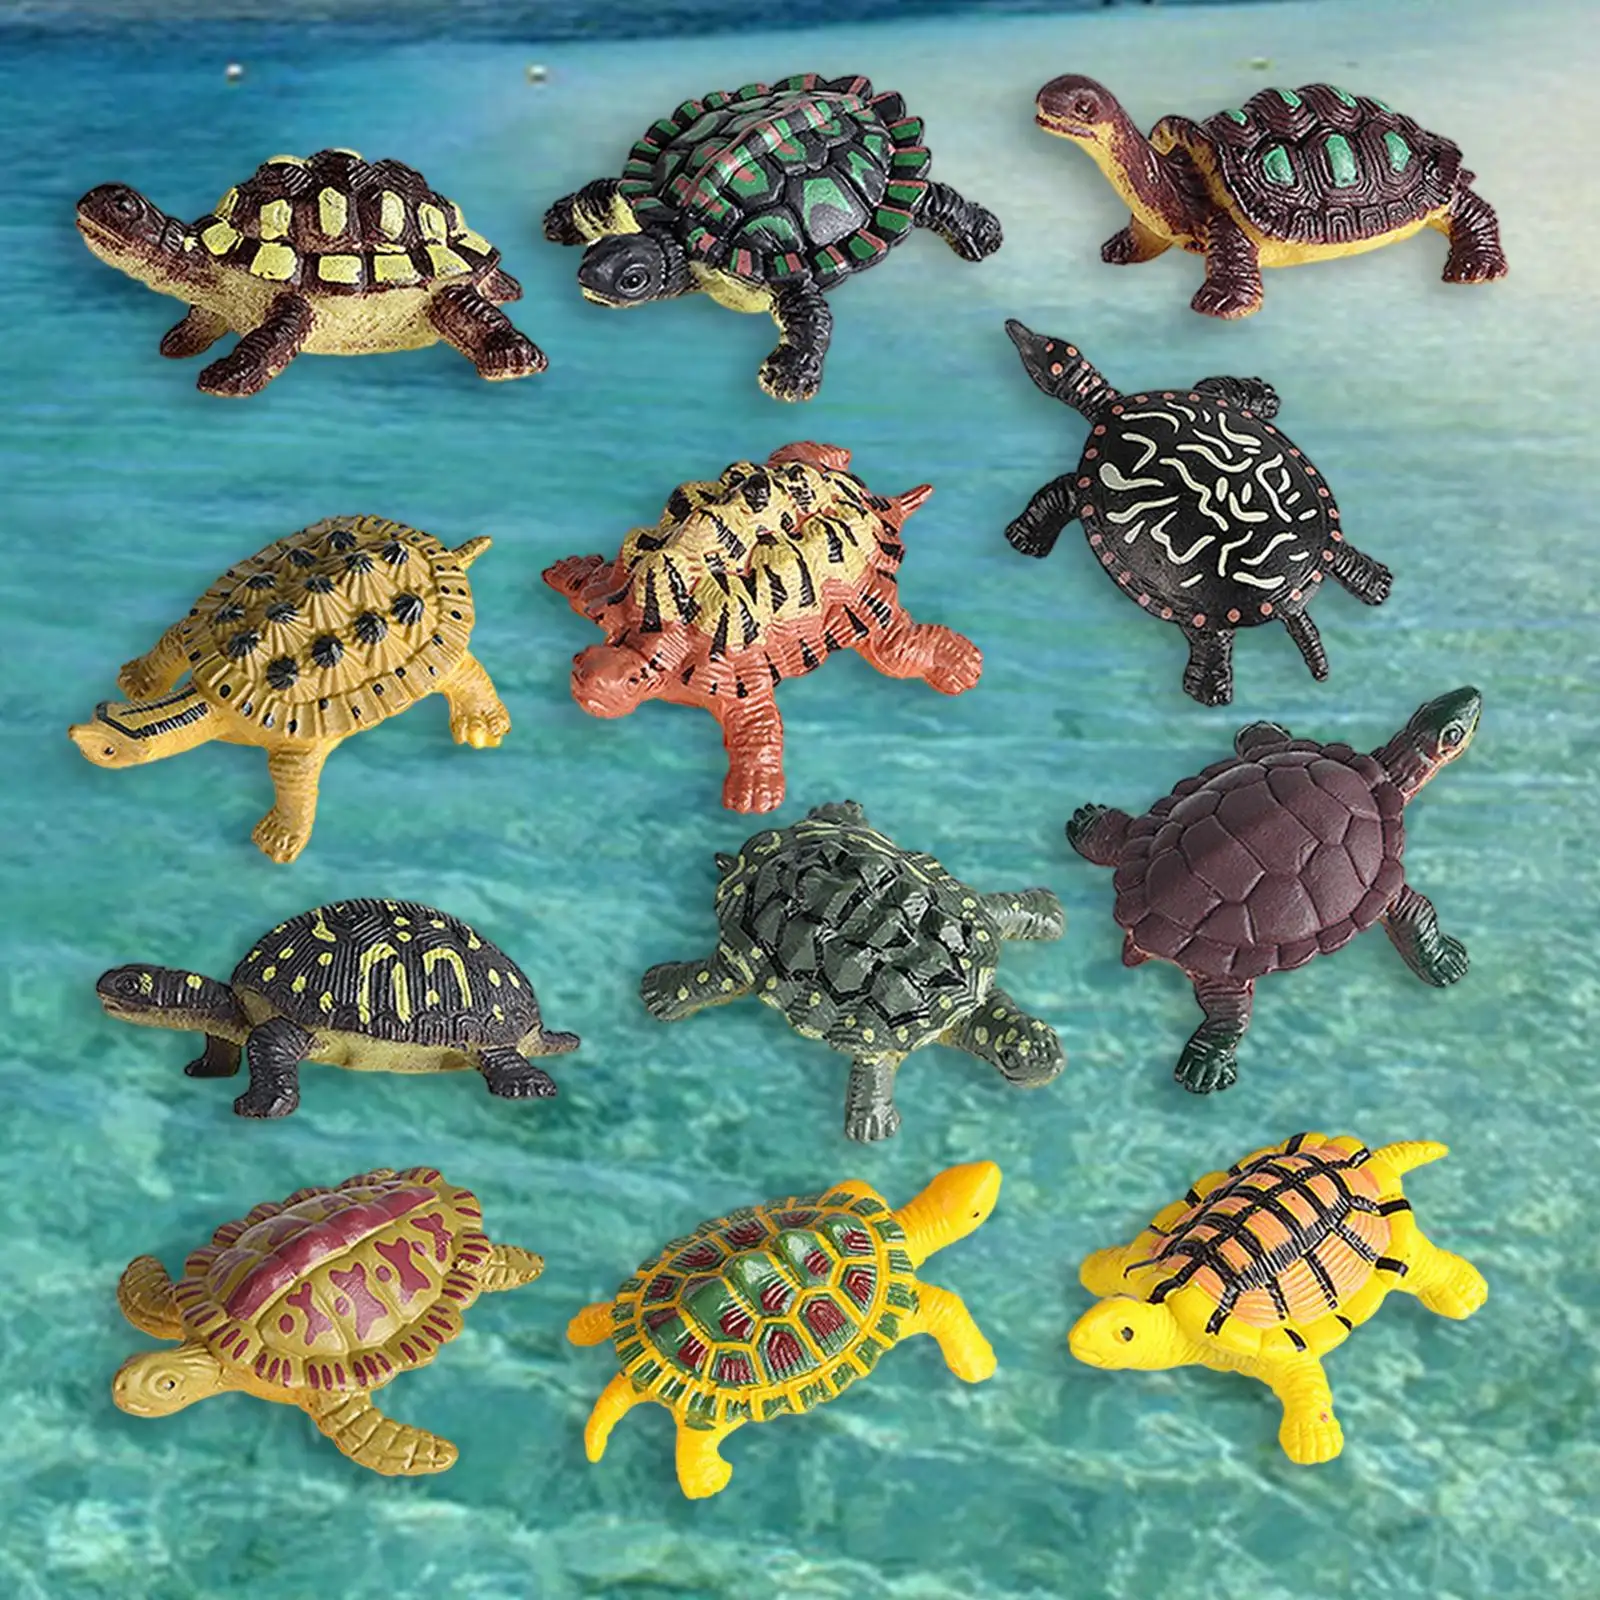 12x  Animal Turtle Series Model Figures Collection Educational Toy